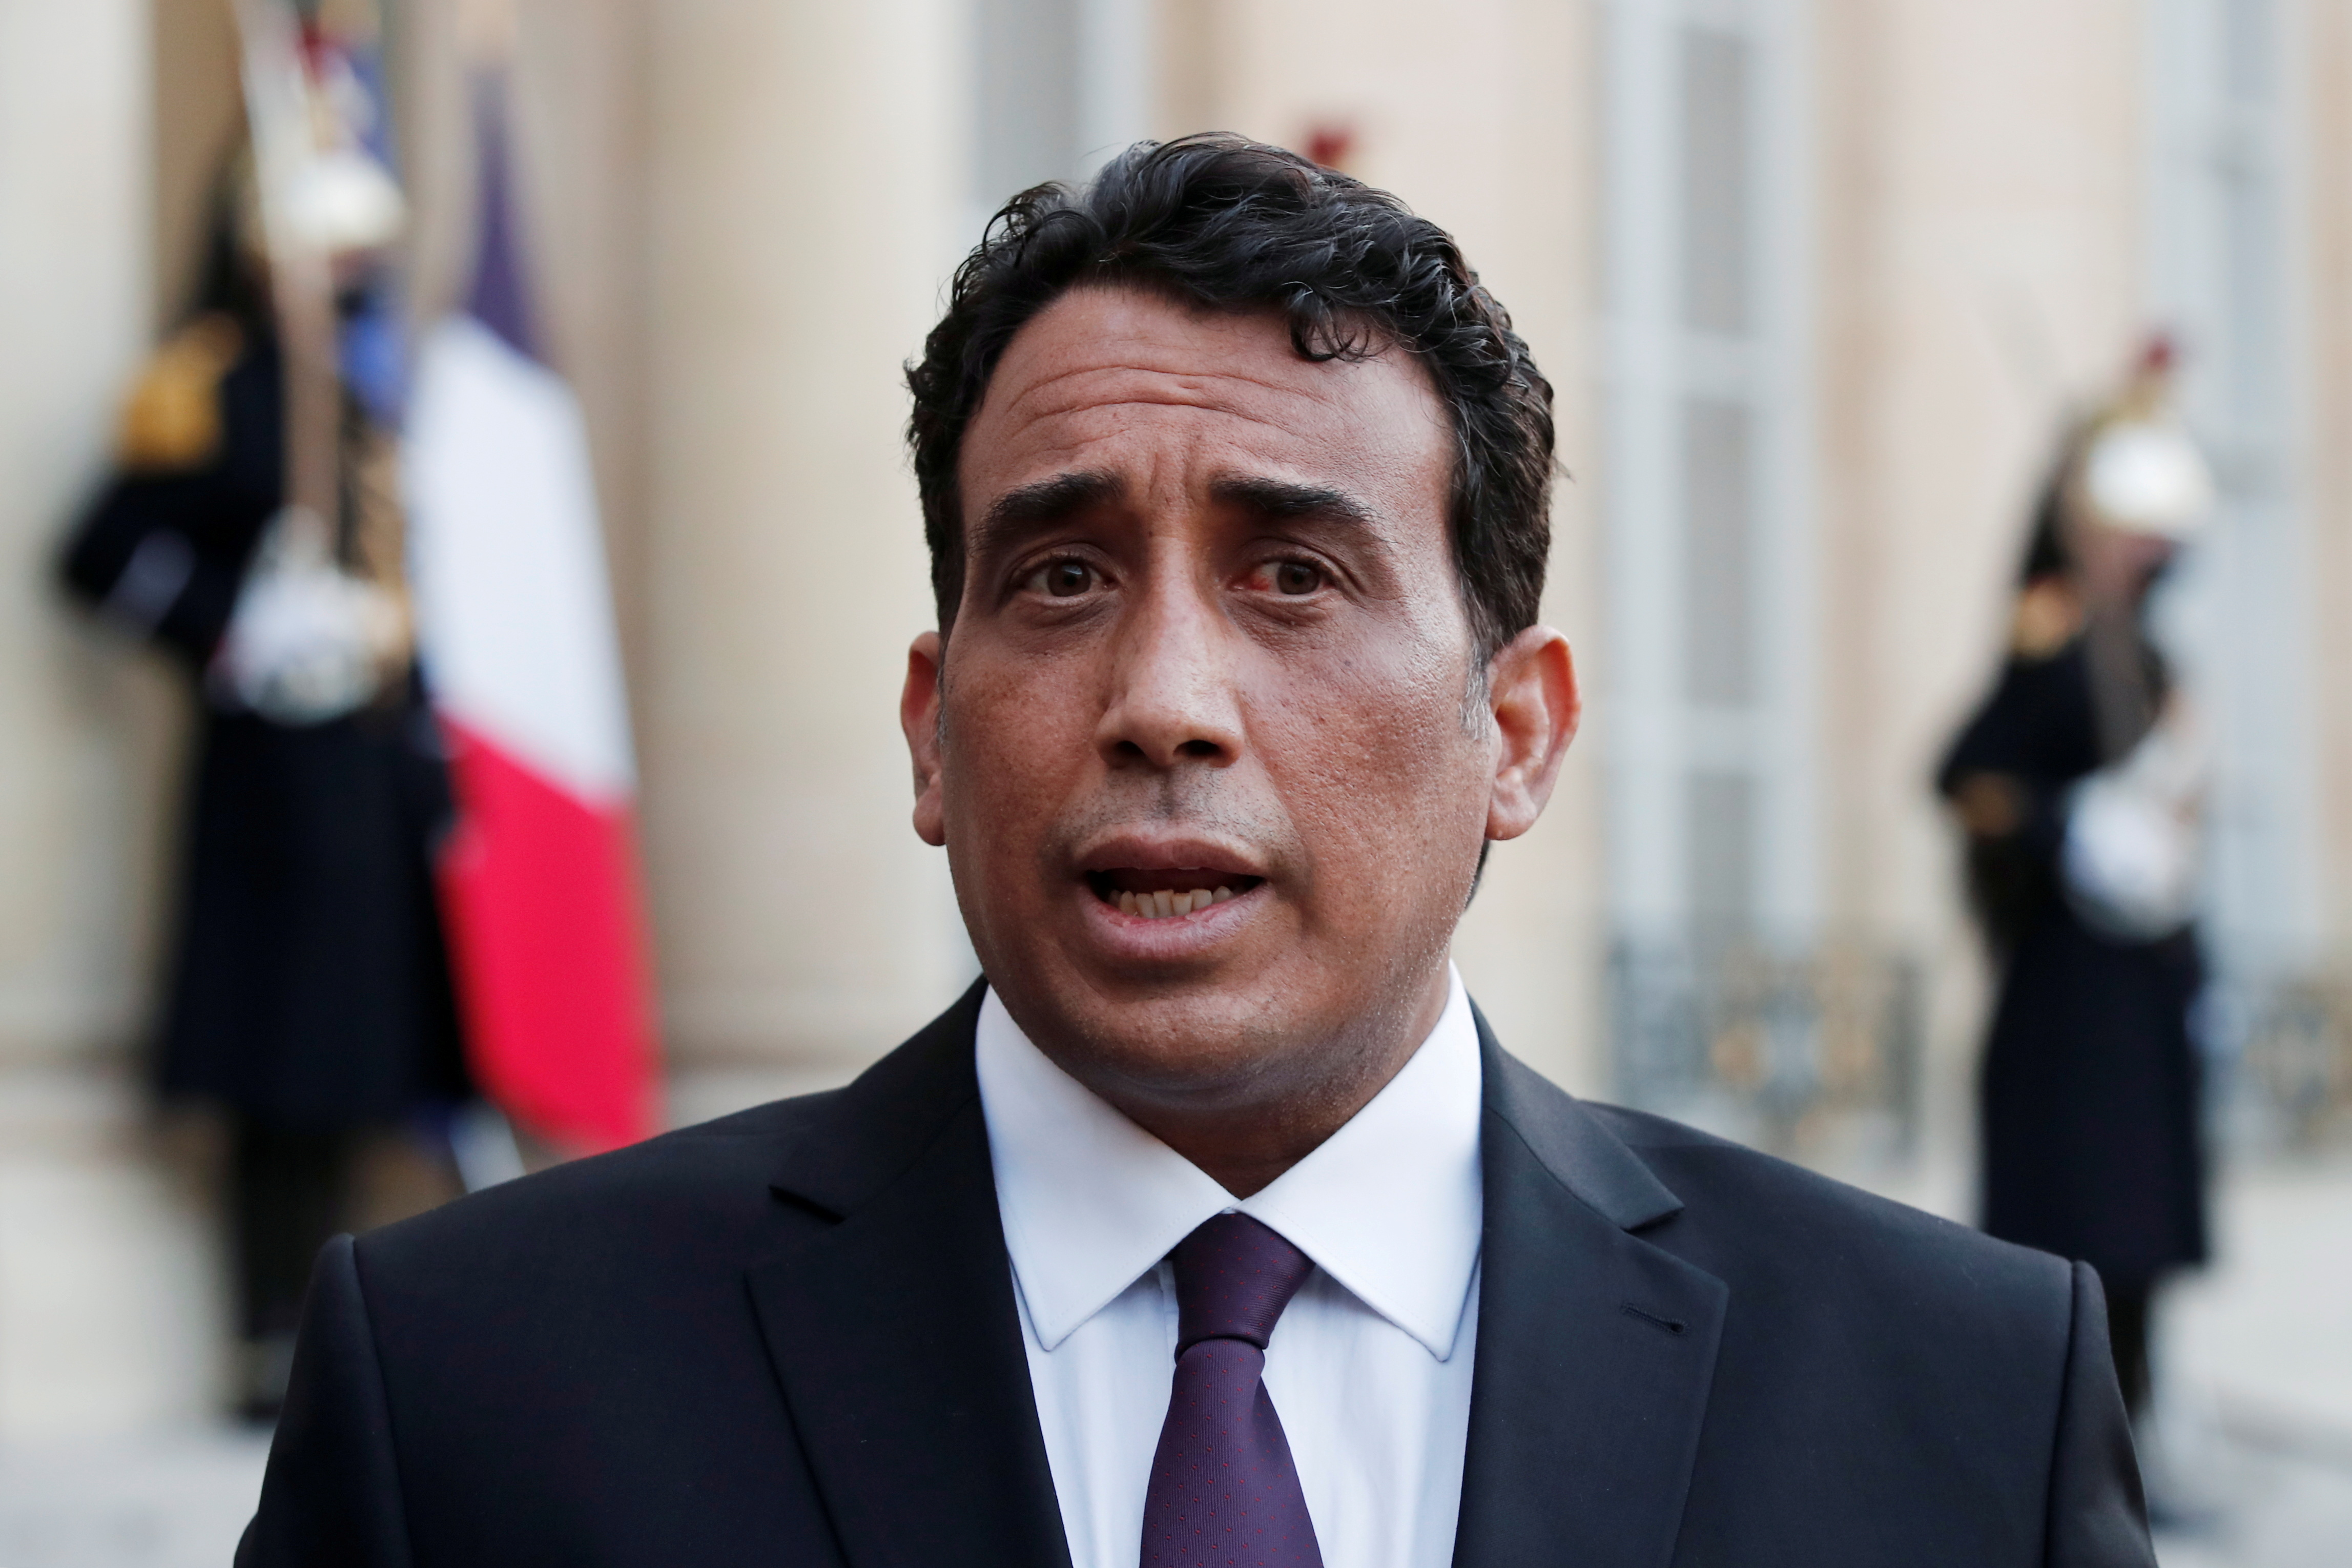 Mohamed al-Menfi, Head of the Presidential Council of Libya, talks to media after a meeting with the French President at the Elysee Palace in Paris